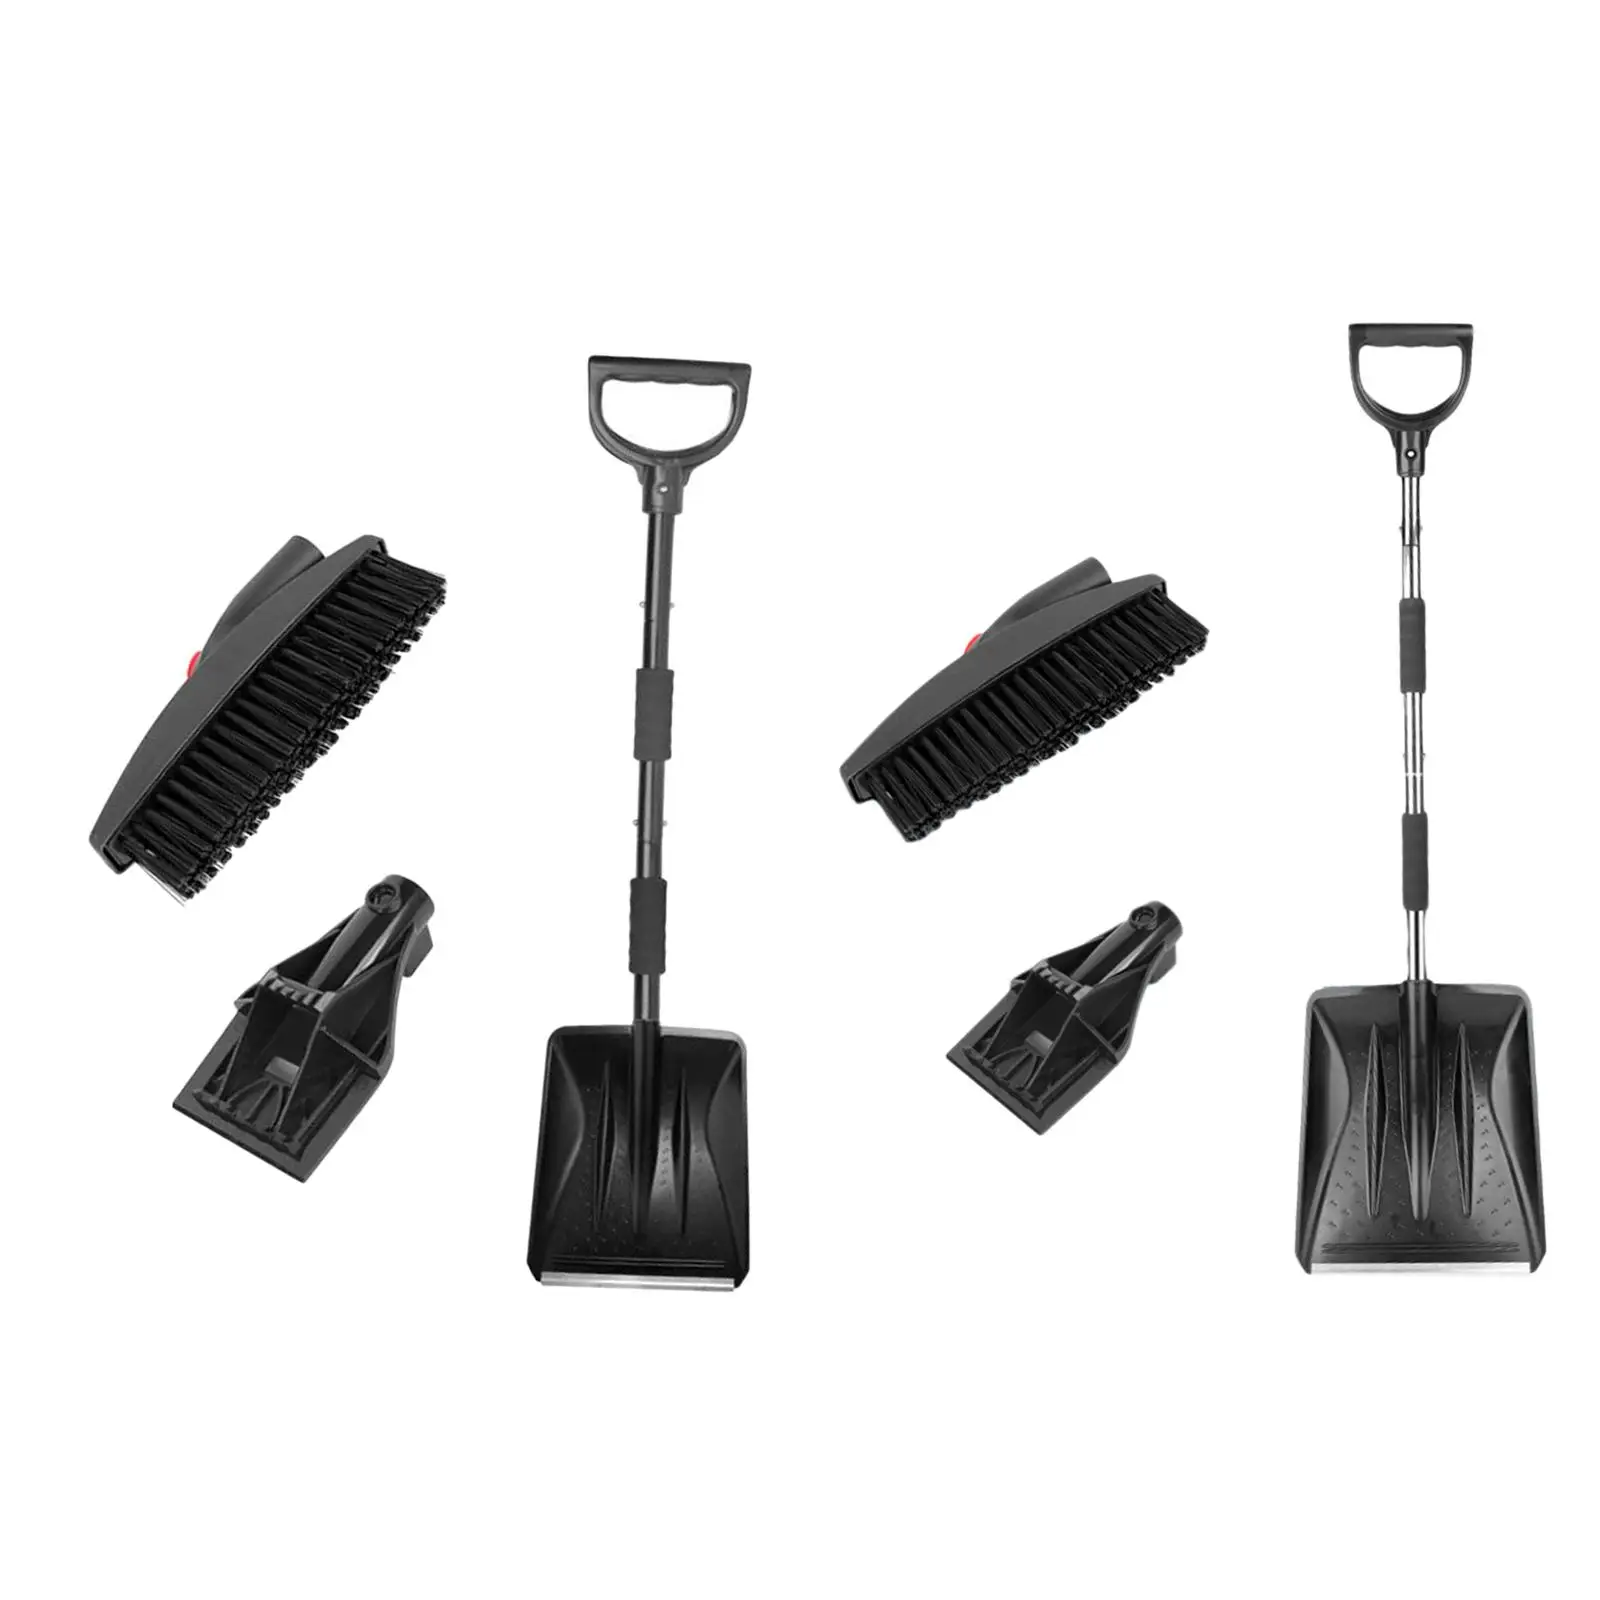 Snow Brush Scraper Snow Shovel for Car 3 in 1 Winter 360 Degree Rotatable Brush Head Practical Car Outdoor Snow Removal